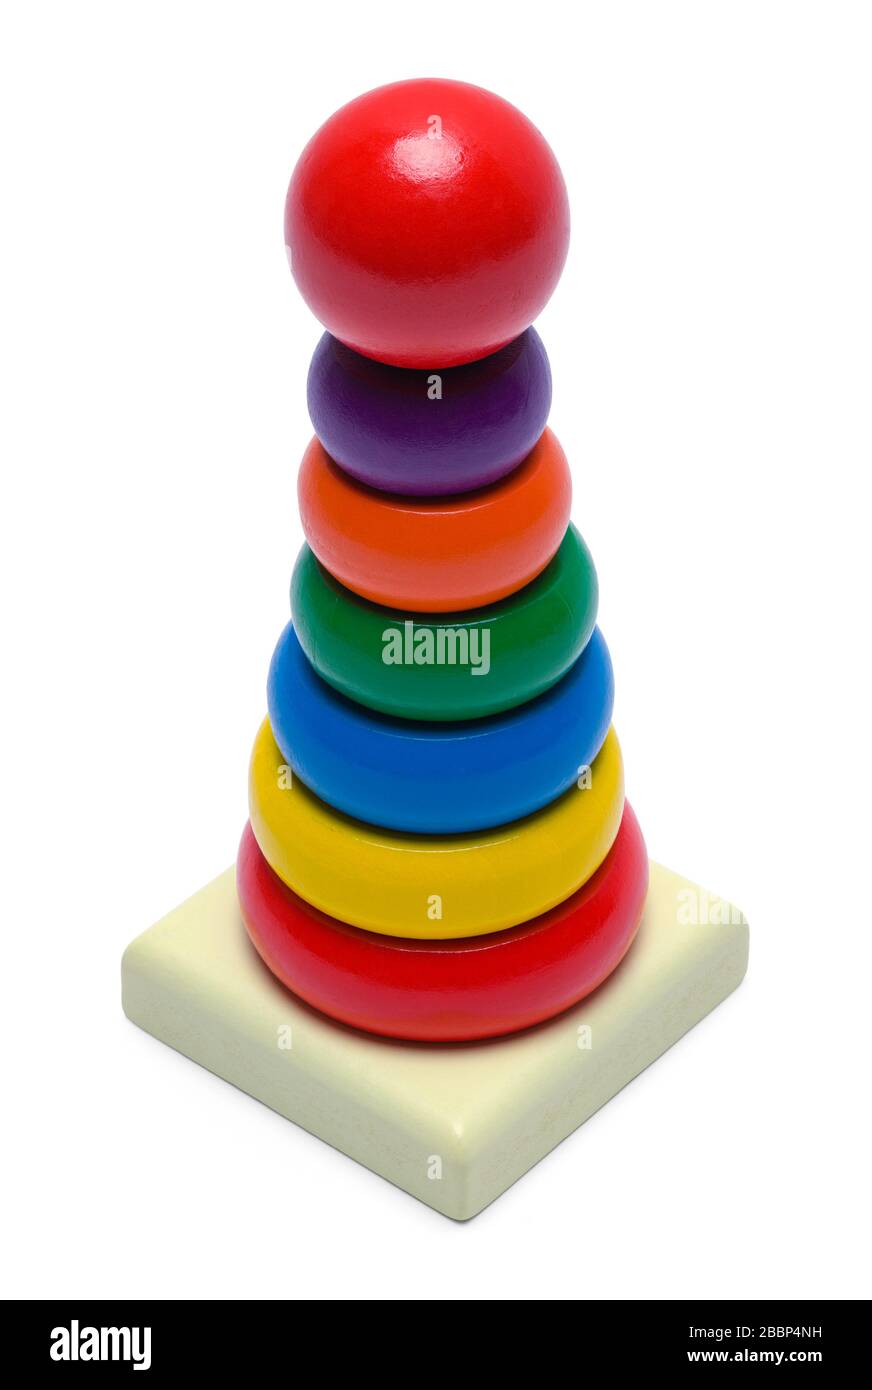 Fun, Easy Stacking Rings Toy Great For Kids! - YouTube